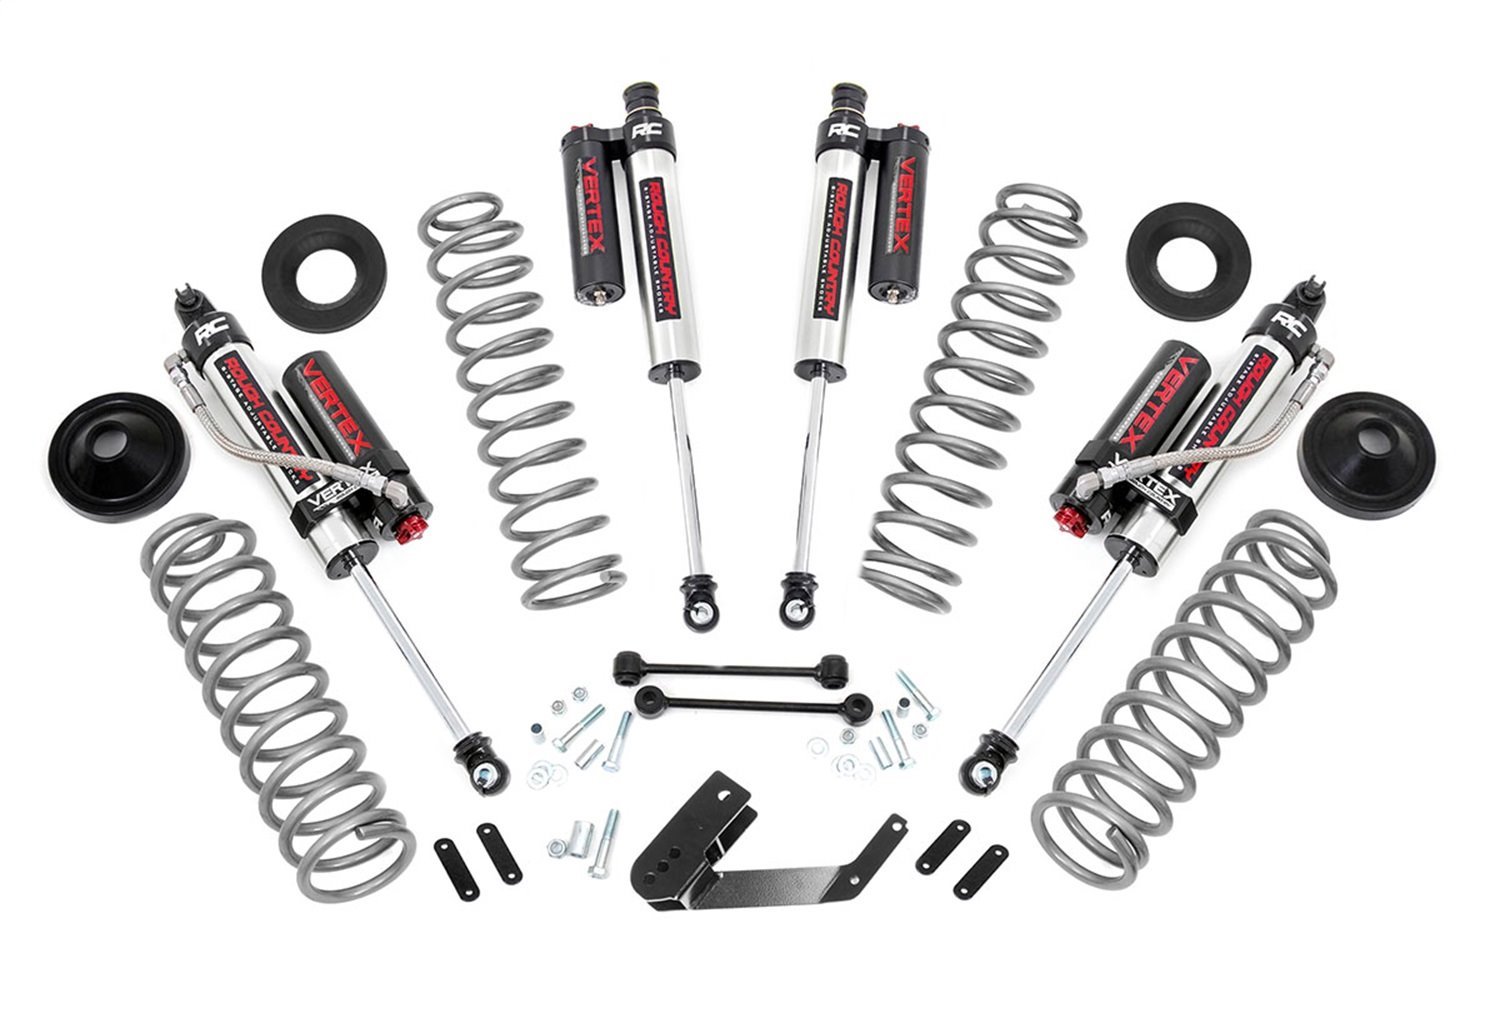 67650 Front and Rear Suspension Lift Kit, Lift Amount: 3.25 in. Front/3.25 in. Rear